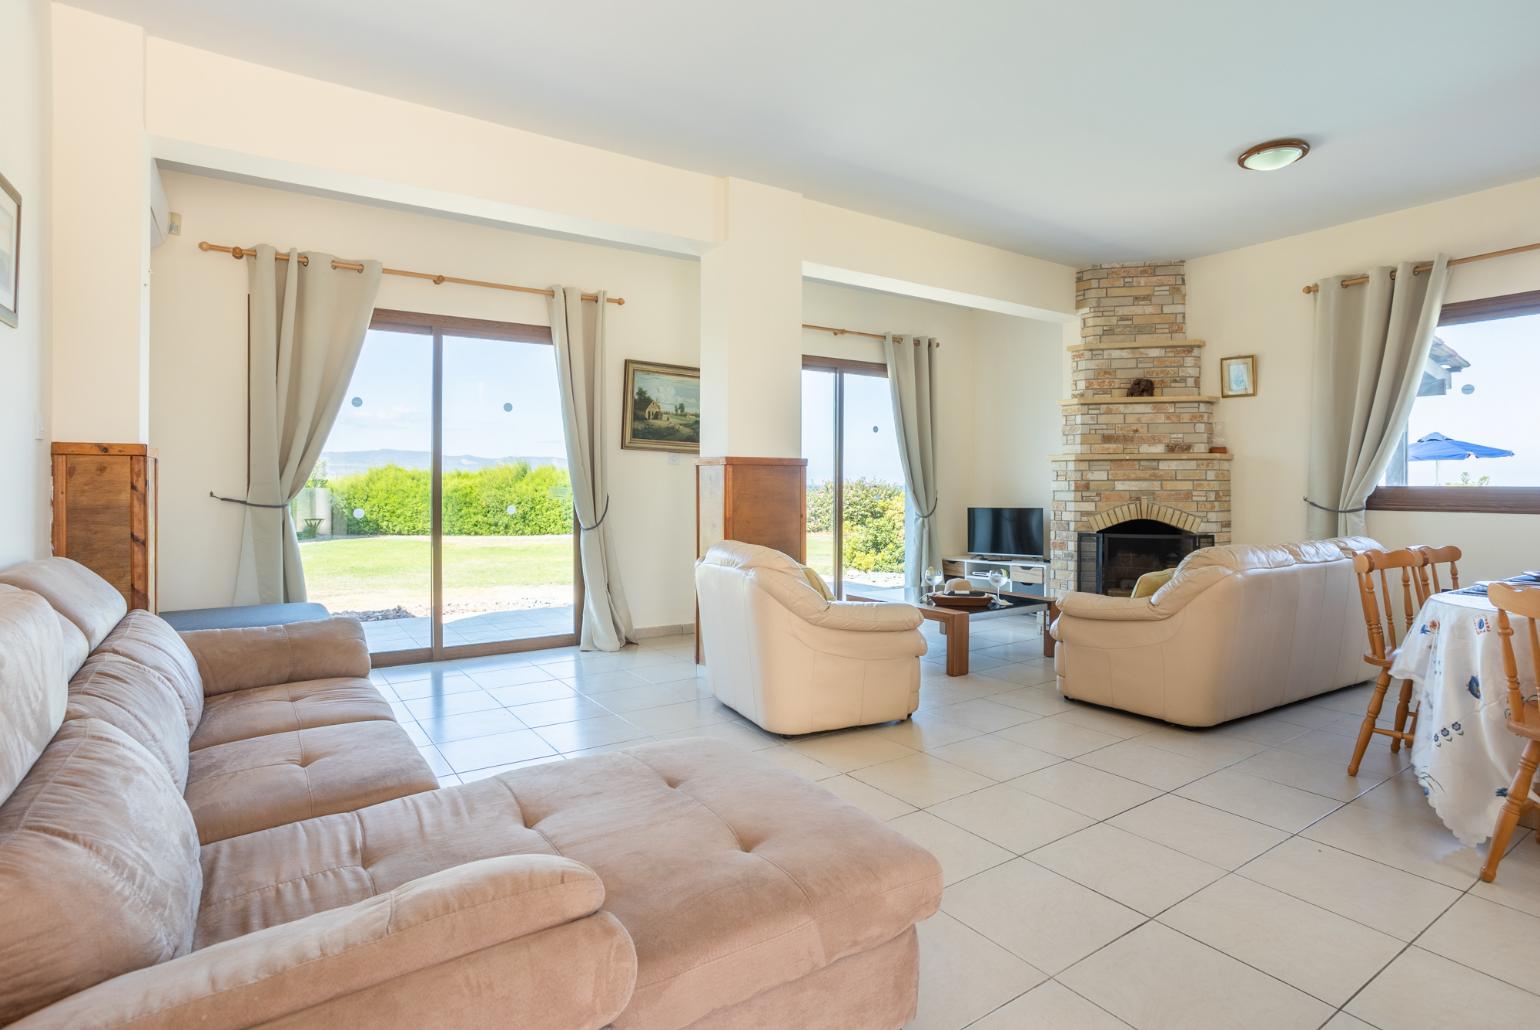 Open-plan living room with sofas, dining area, kitchen, ornamental fireplace, A/C, WiFi internet, satellite TV, and sea views